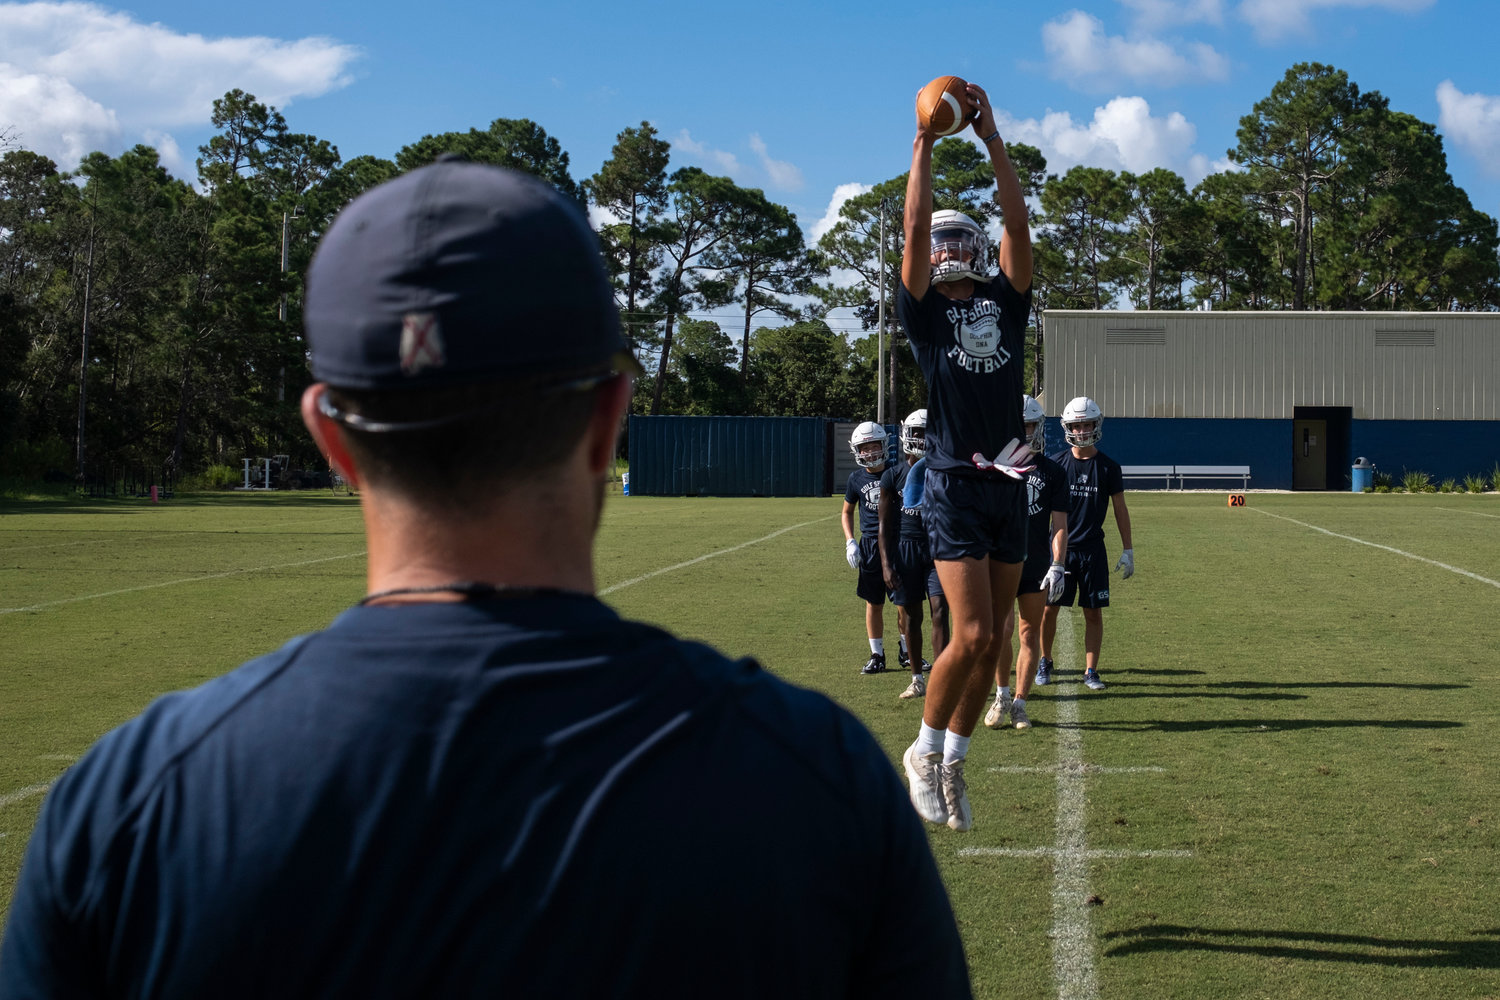 Footballs were finally being flung around once again Aug. 1, when fall sports practices officially kicked off the AHSAA season Monday morning.